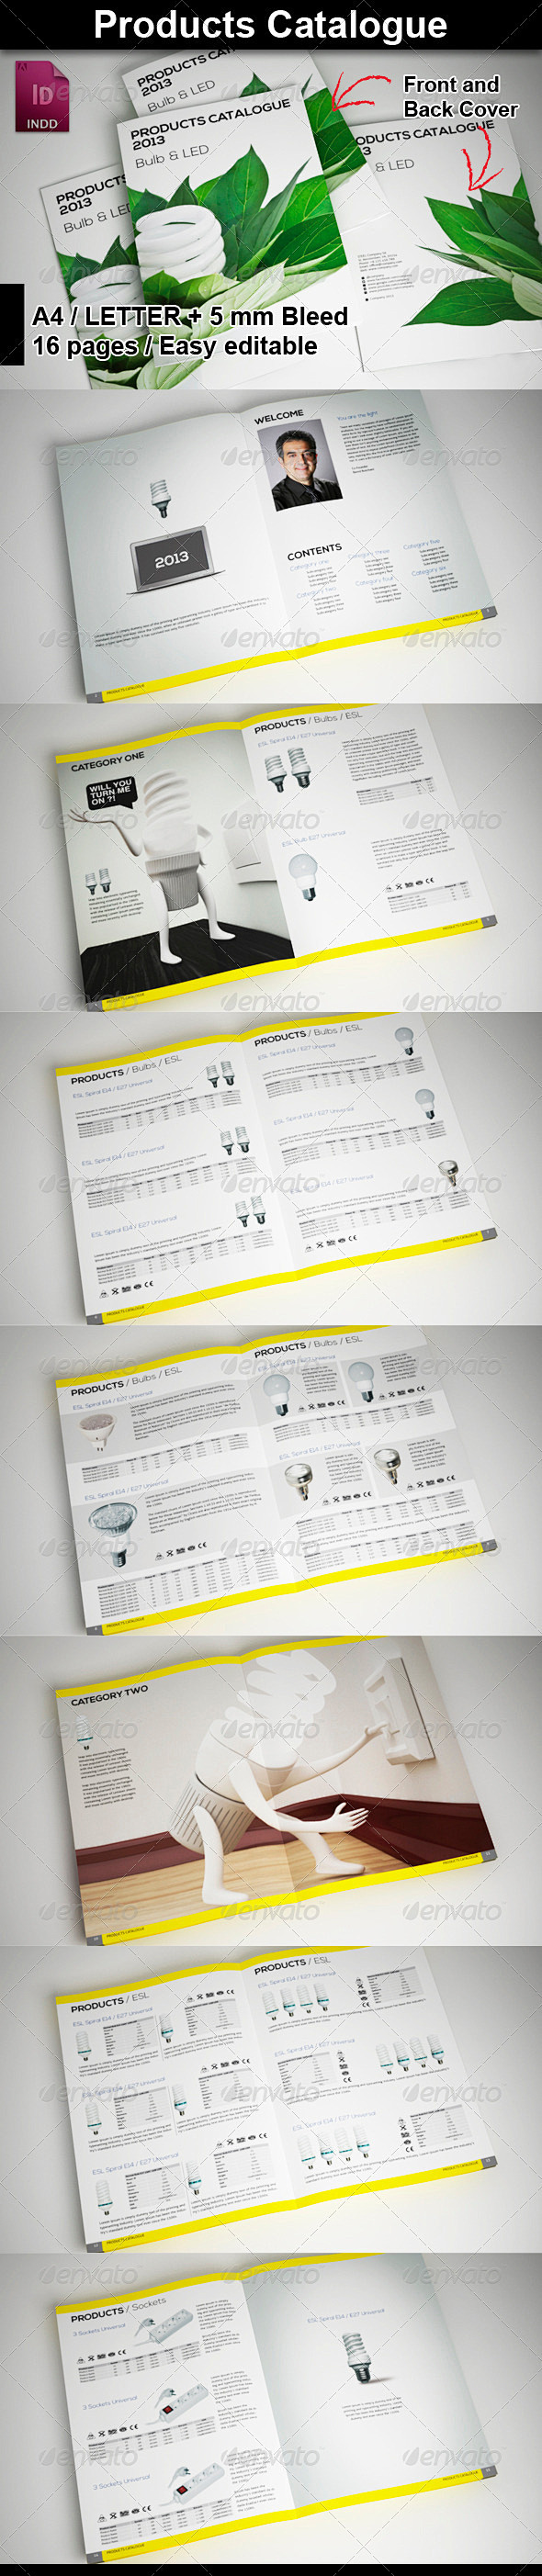 Products Catalogue -...